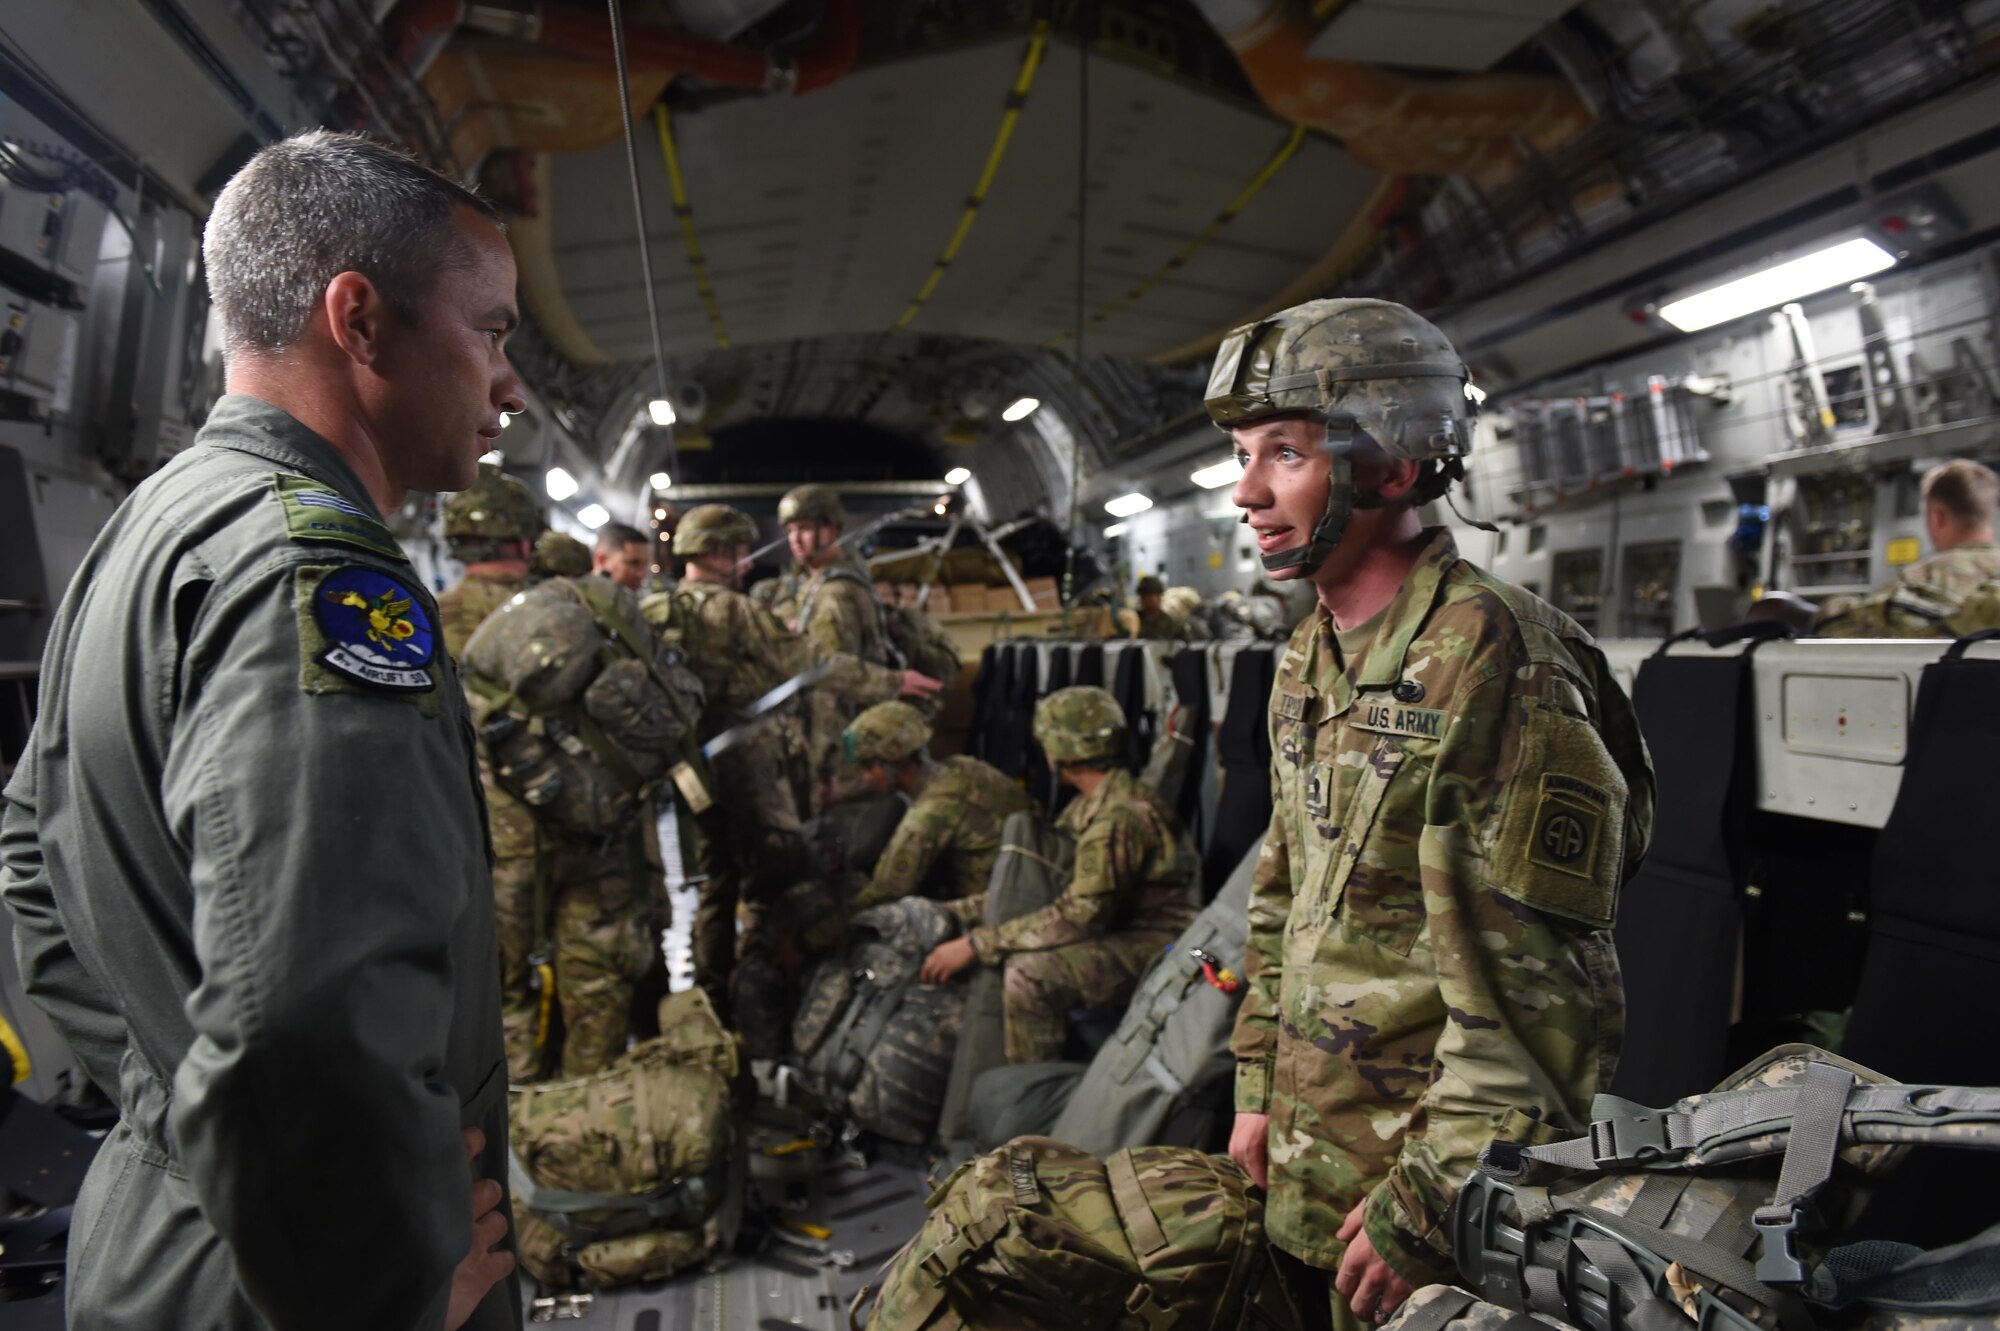 Royal Canadian Air Force Sgt. Wes Ramsay, 8th Airlift Squadron loadmaster, speaks to Army SPC. Dakota Truscott, 82nd Airborne Division, on a 62nd Airlift Wing C-17 Globemaster III at Pope Army Air Field, N.C., on June 6, 2016. Ramsay, who was participating in Exercise Swift Response, is part of an Air Force exchange program at Joint Base Lewis-McChord, Wash., and has worked at McChord for two years. (Air Force photo/Staff Sgt. Naomi Shipley)